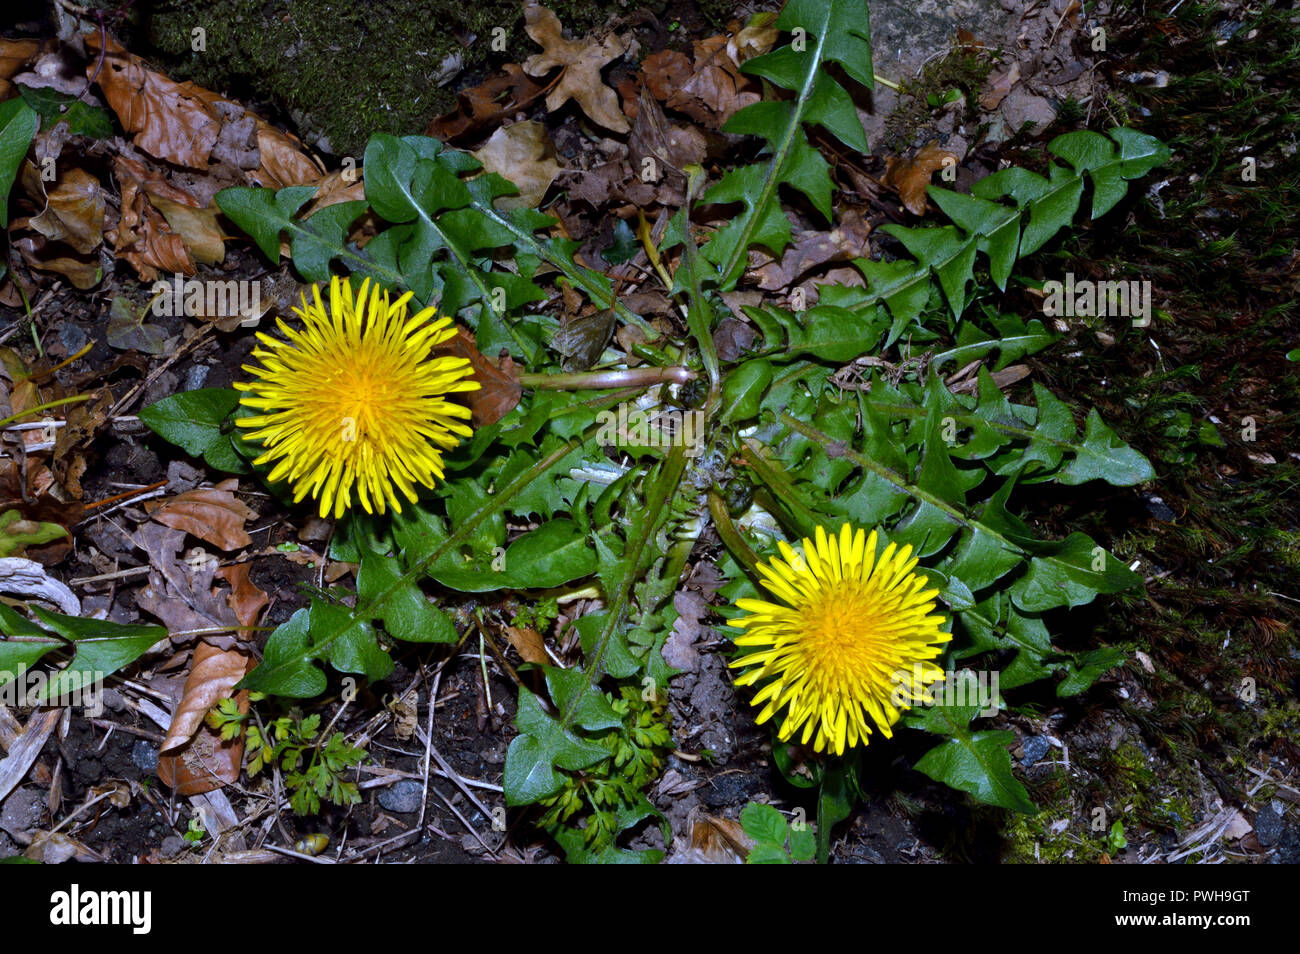 Taraxacum officinale (dandelion) is a flowering plant found in temperate regions of the world in lawns, on roadsides, and on disturbed ground. Stock Photo